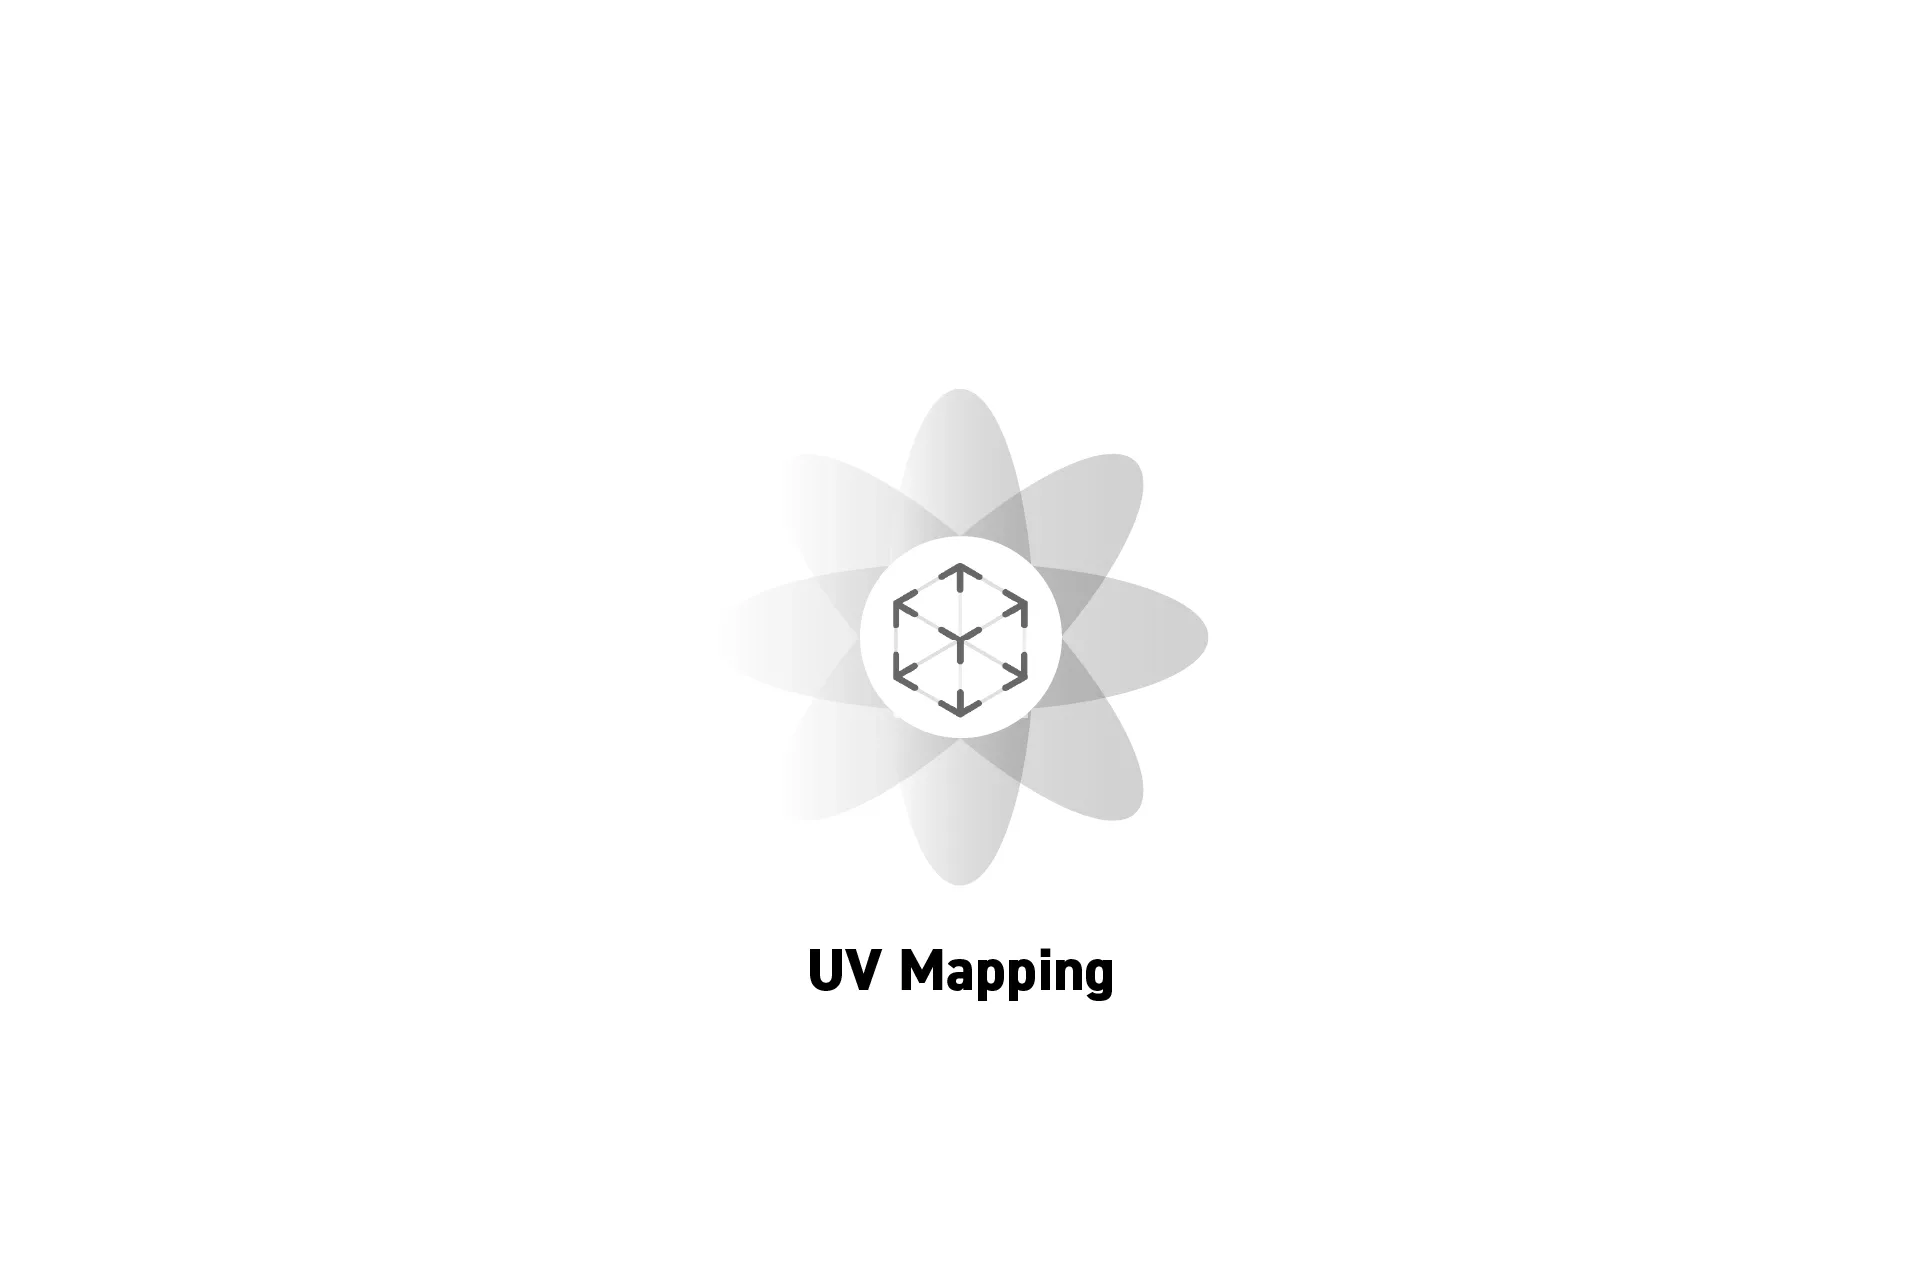 A flower that represents spatial computing with the text "UV Mapping" beneath it.